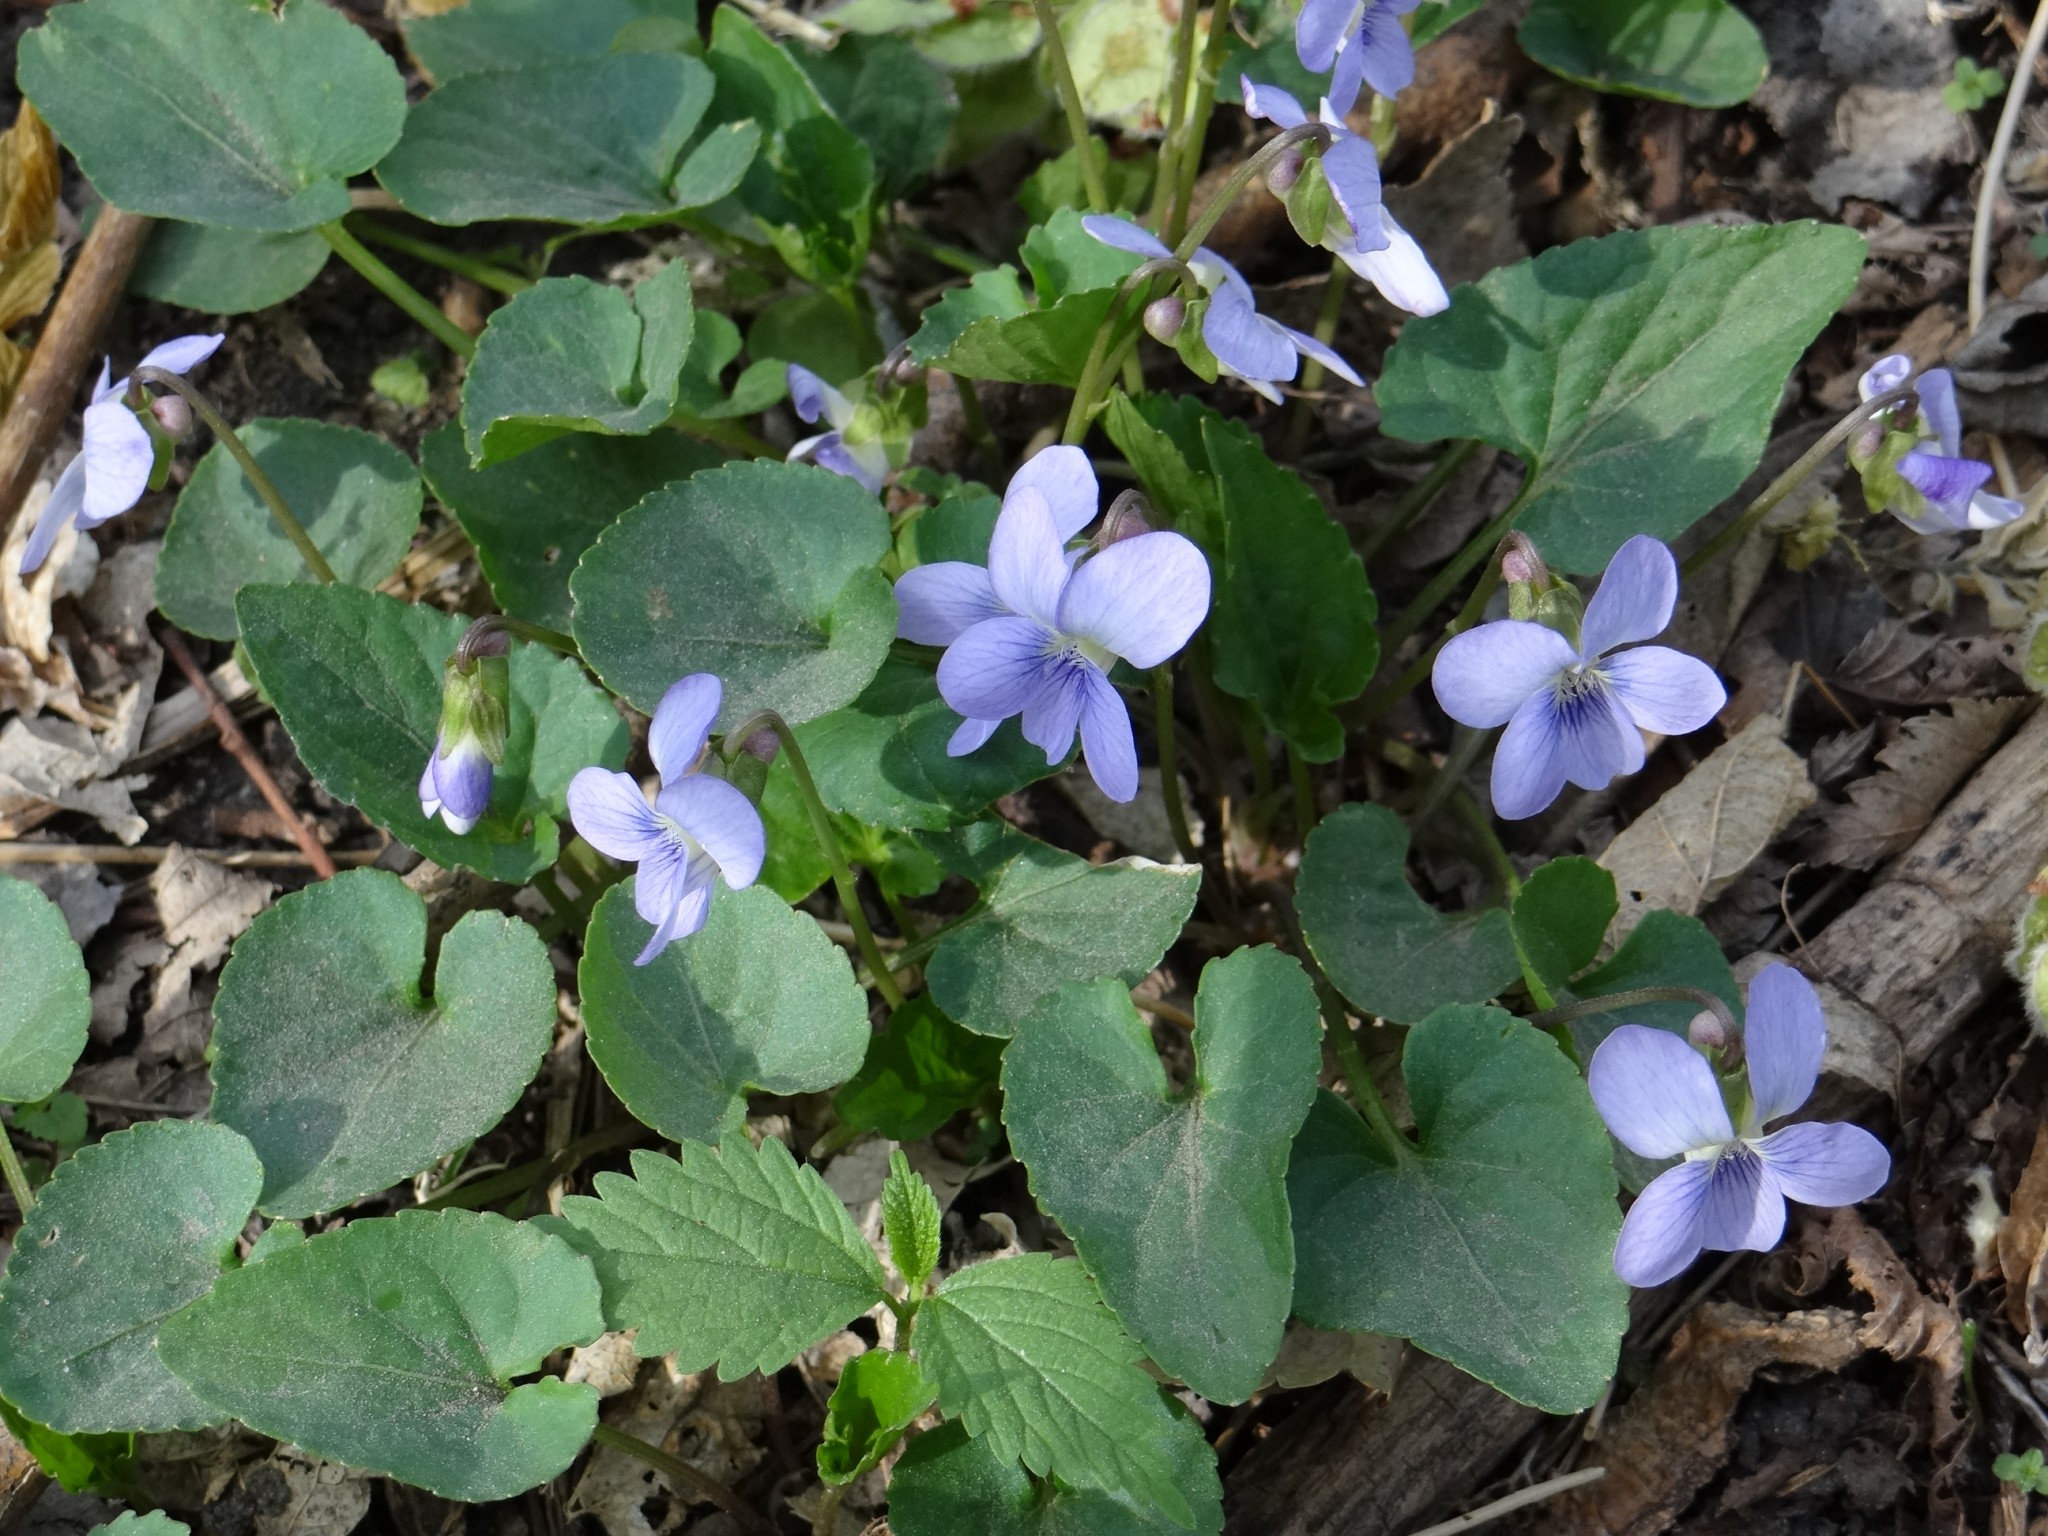 Wild violets. Photo by Greg Wagner.